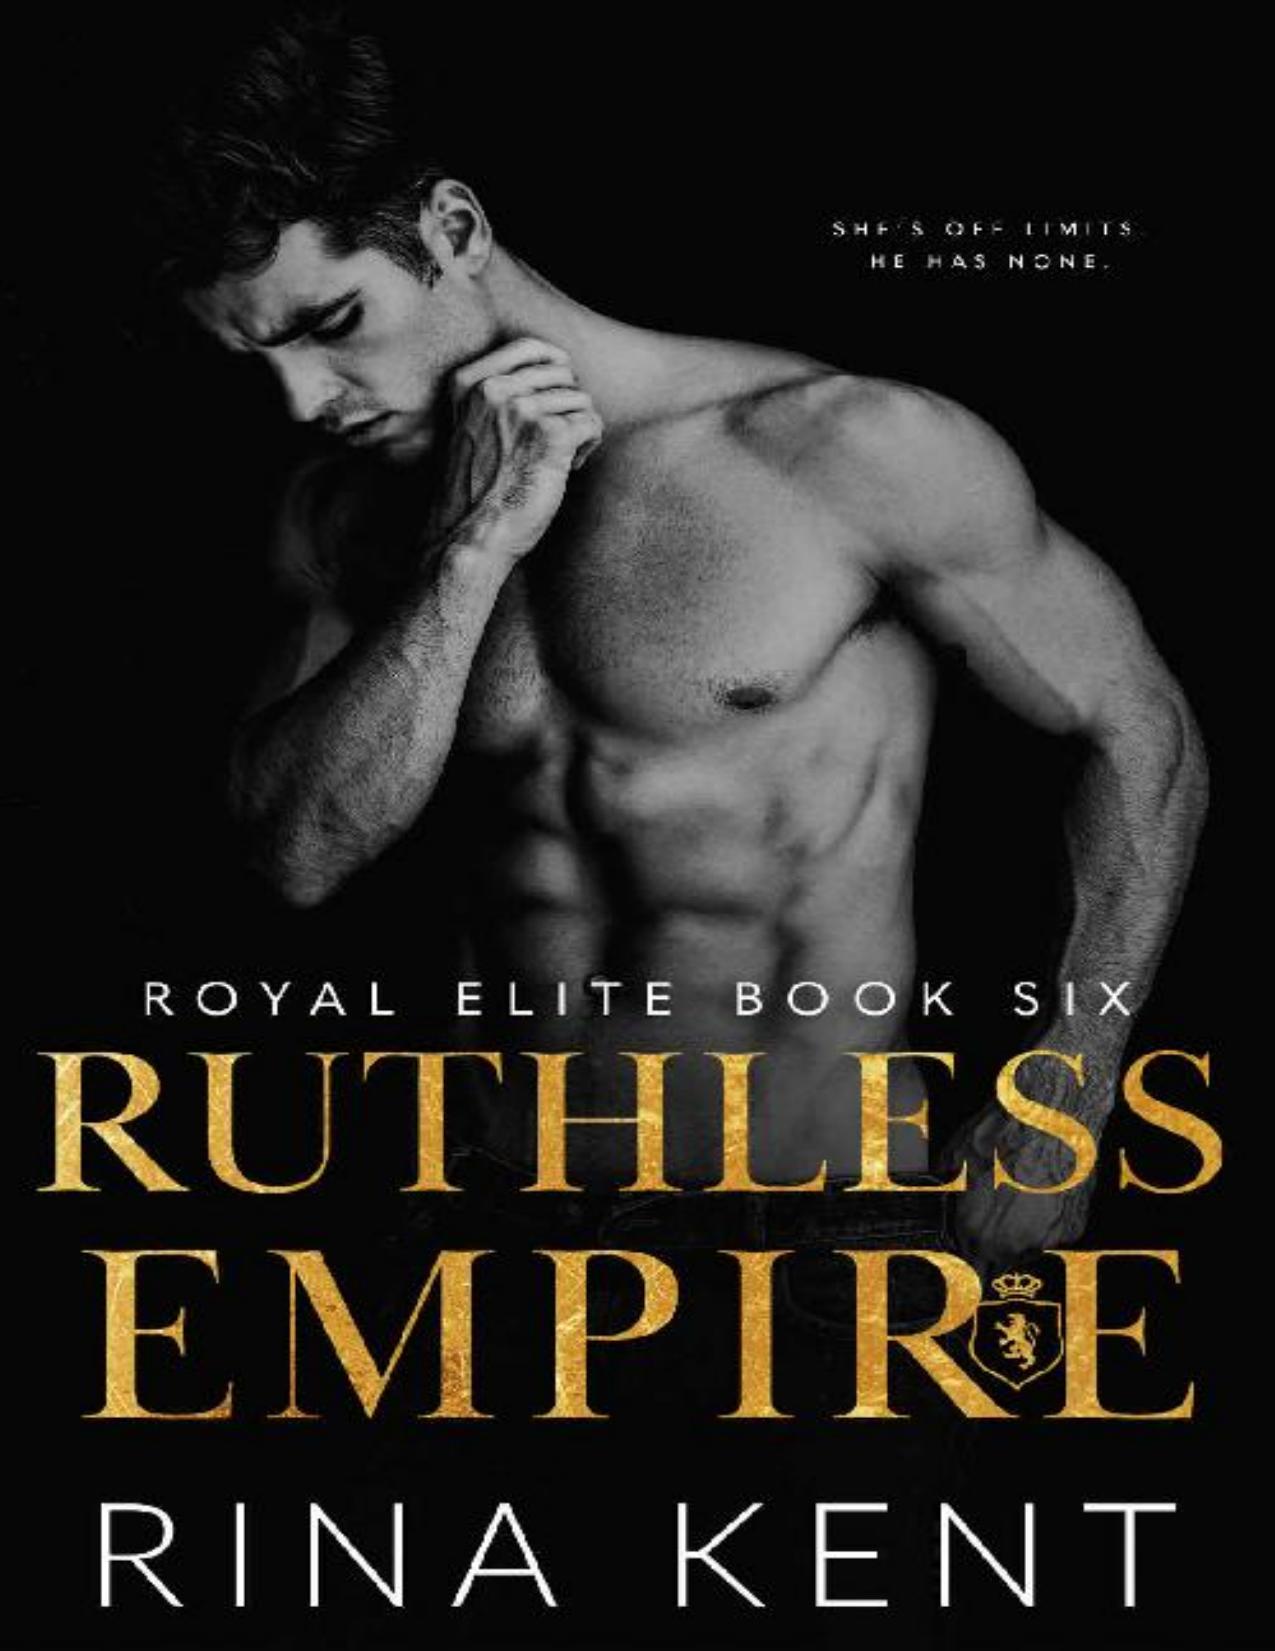 Ruthless Empire (Royal Elite Book 6) by Rina Kent